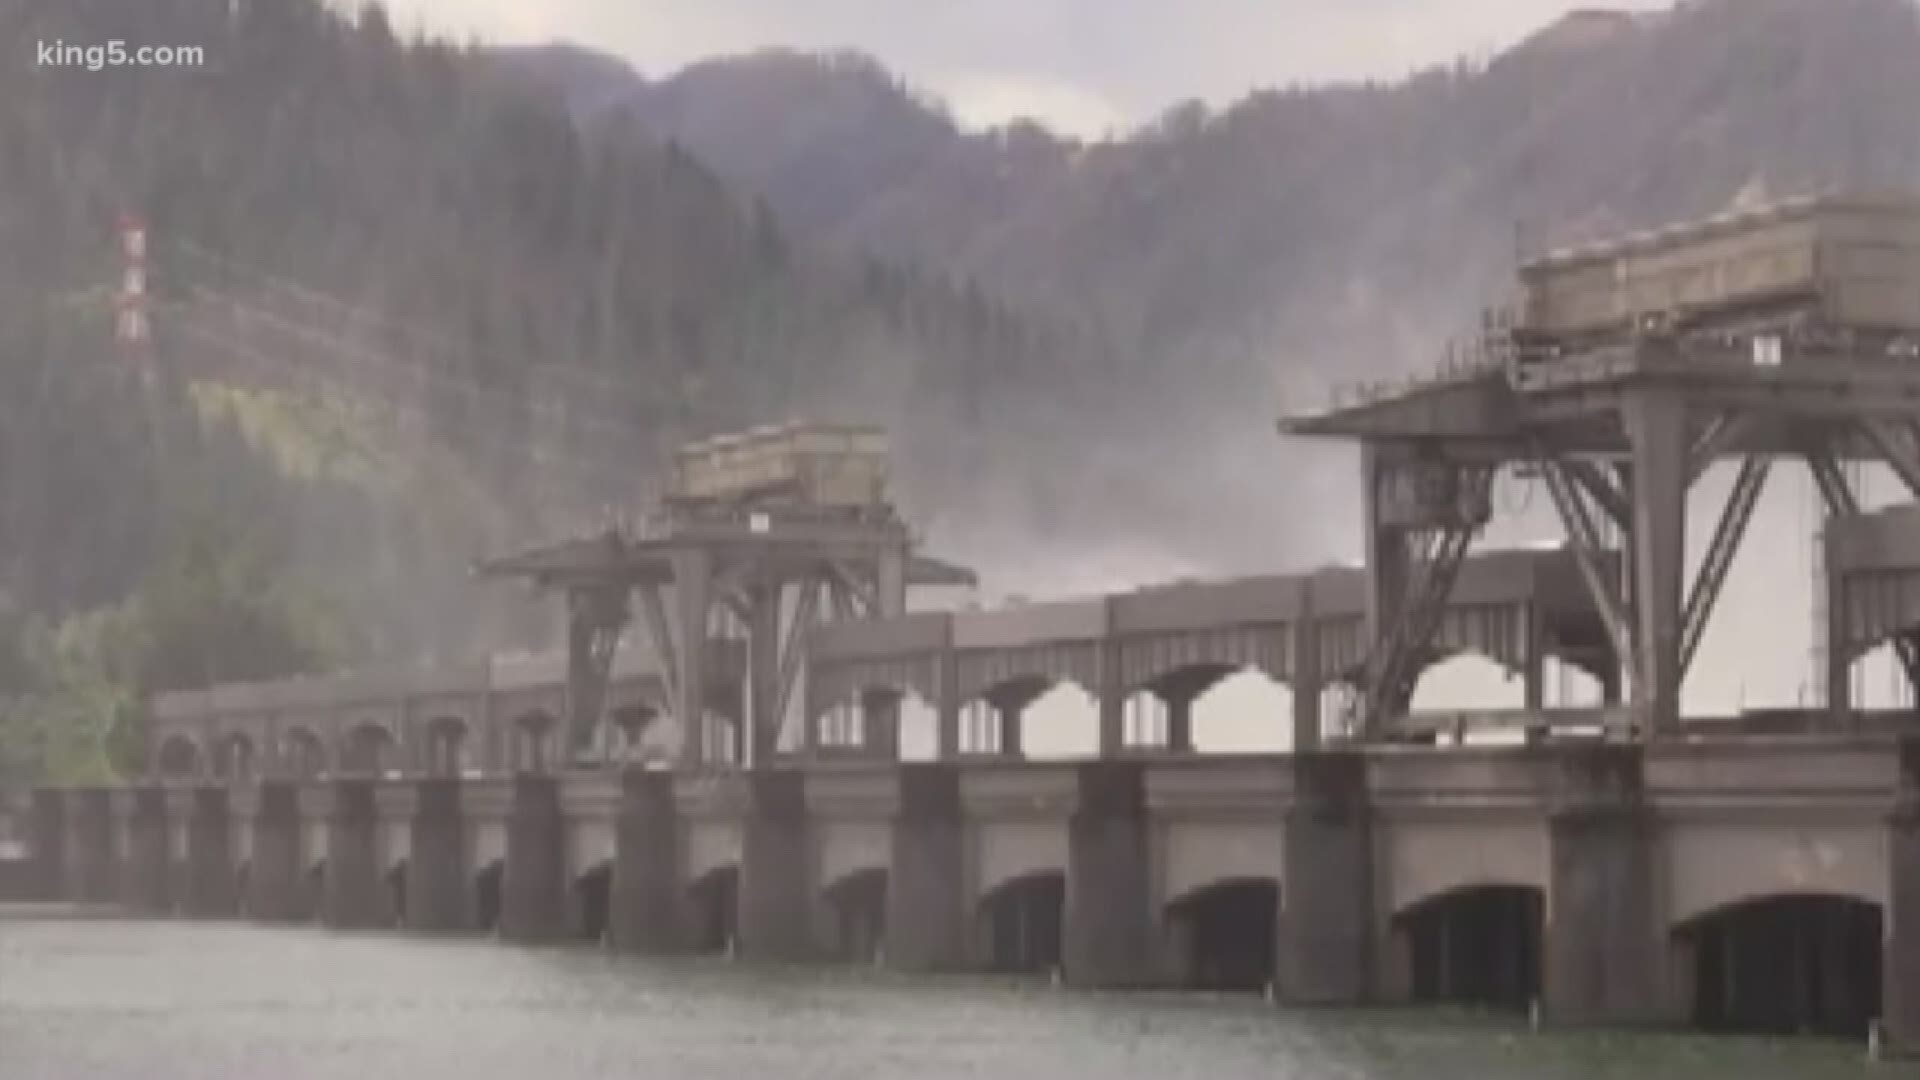 The Lummi Nation and the Yakama Nation are calling for the removal of three major hydroelectric dams on the Columbia River. KGW's Keely Chalmers reports.